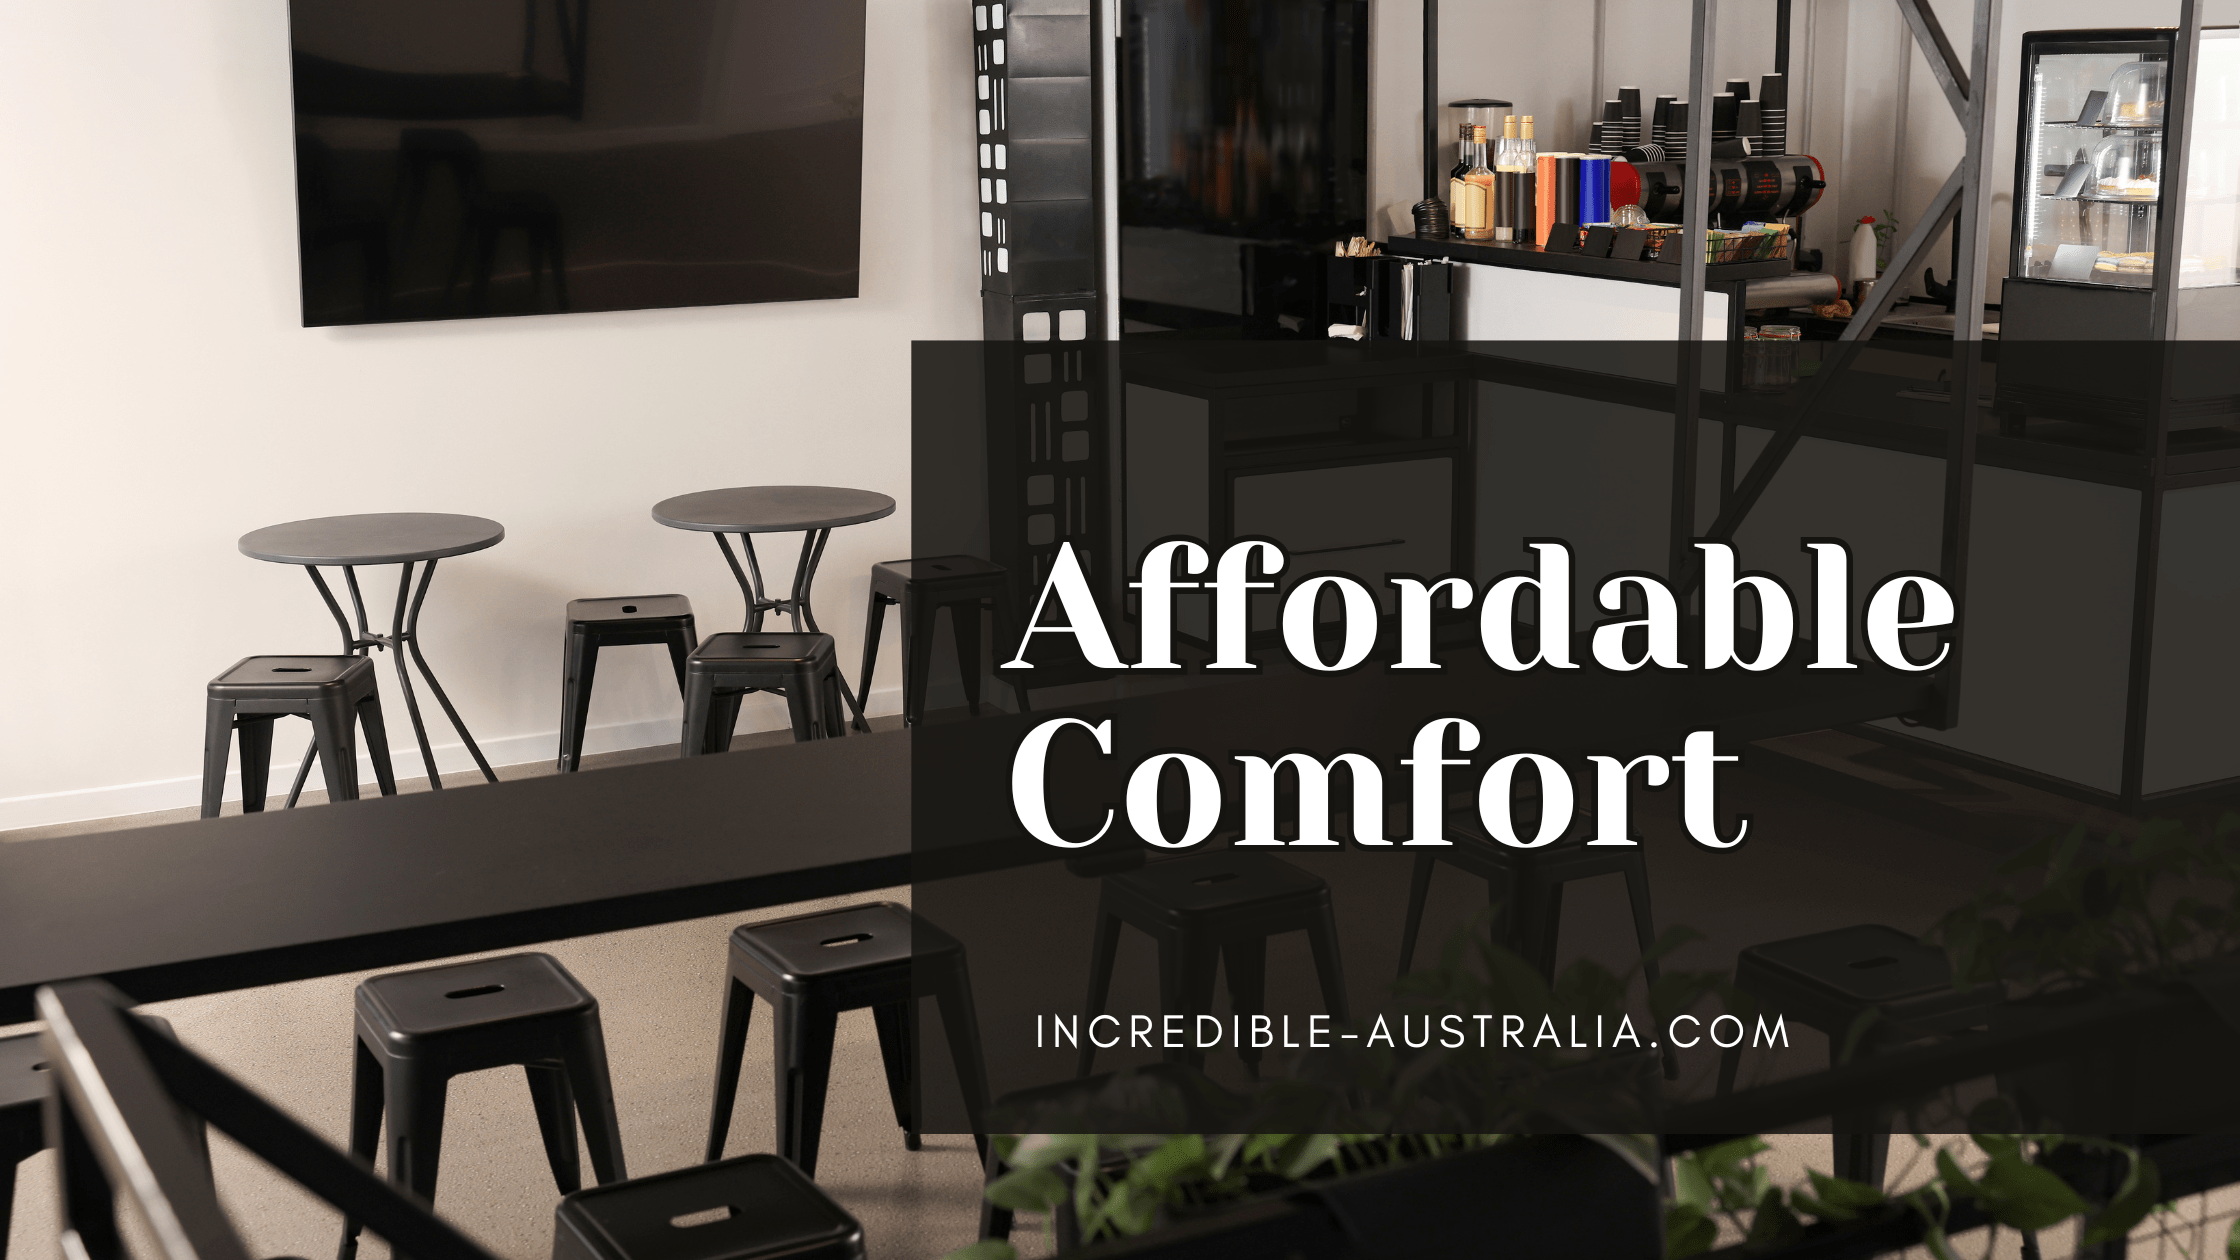 Affordable Comfort: A Home Away from Home